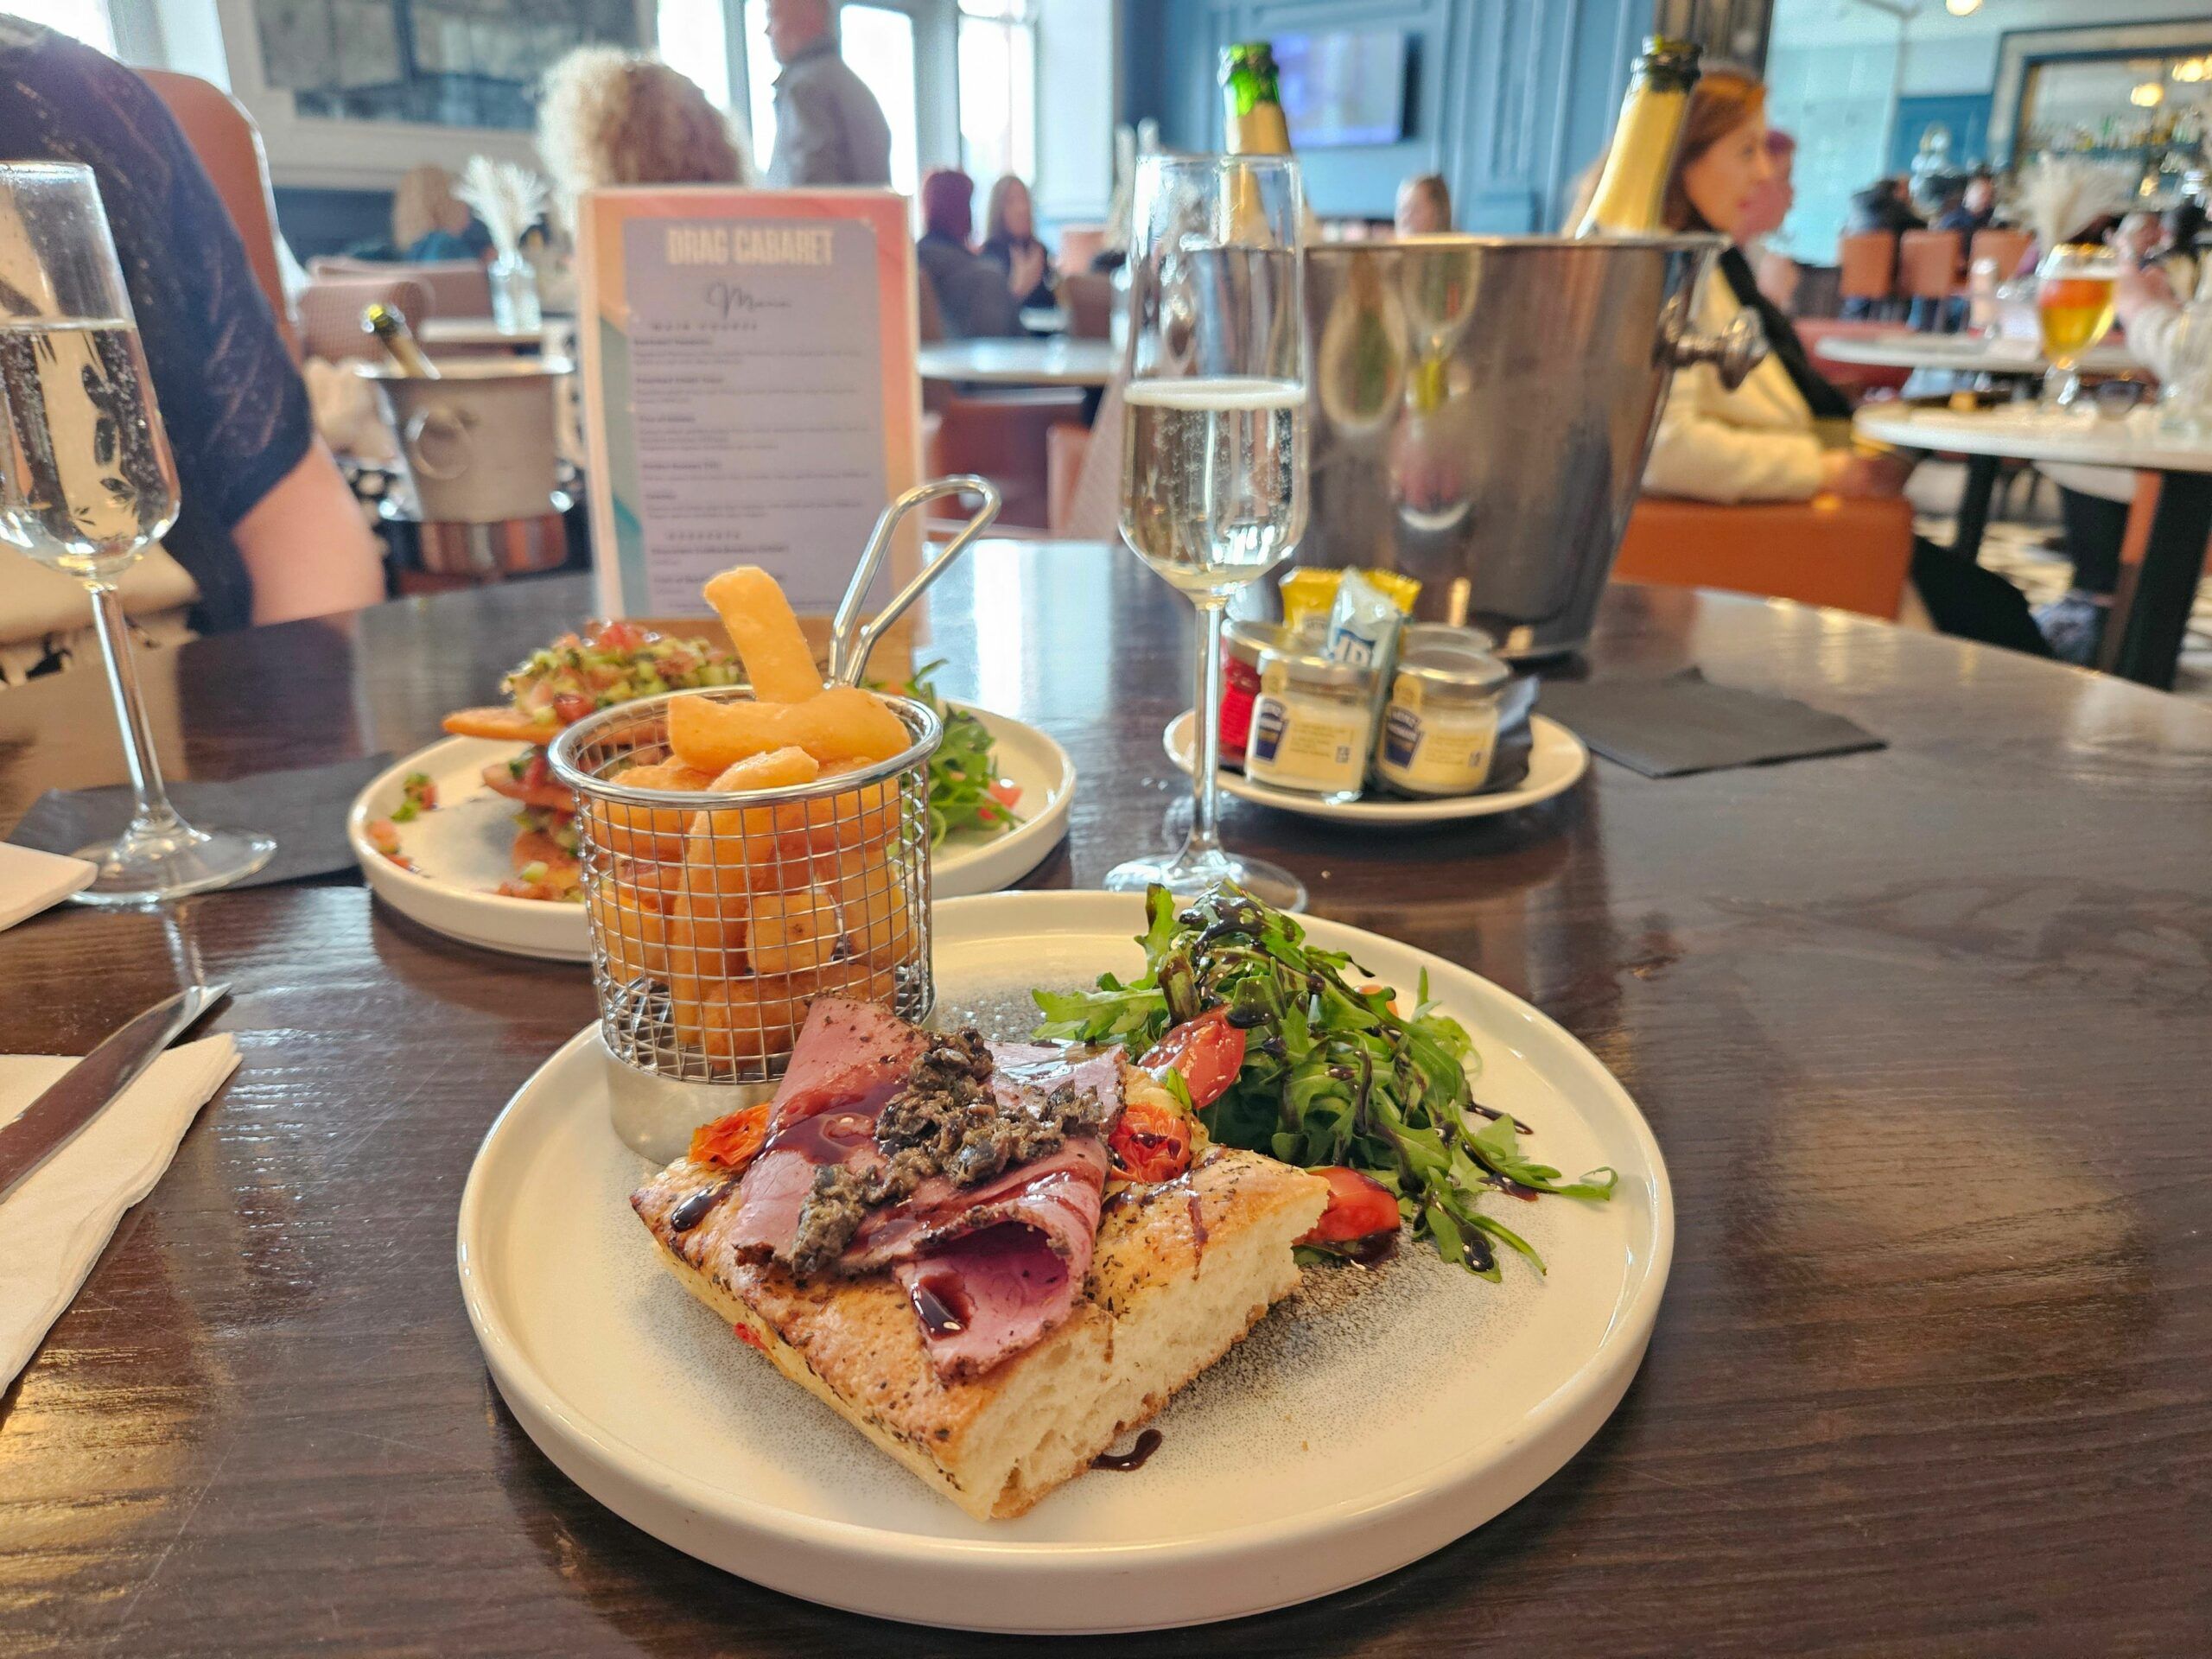 Peppered Pastrami Focaccia served as part of drag queen brunch at metropole bar